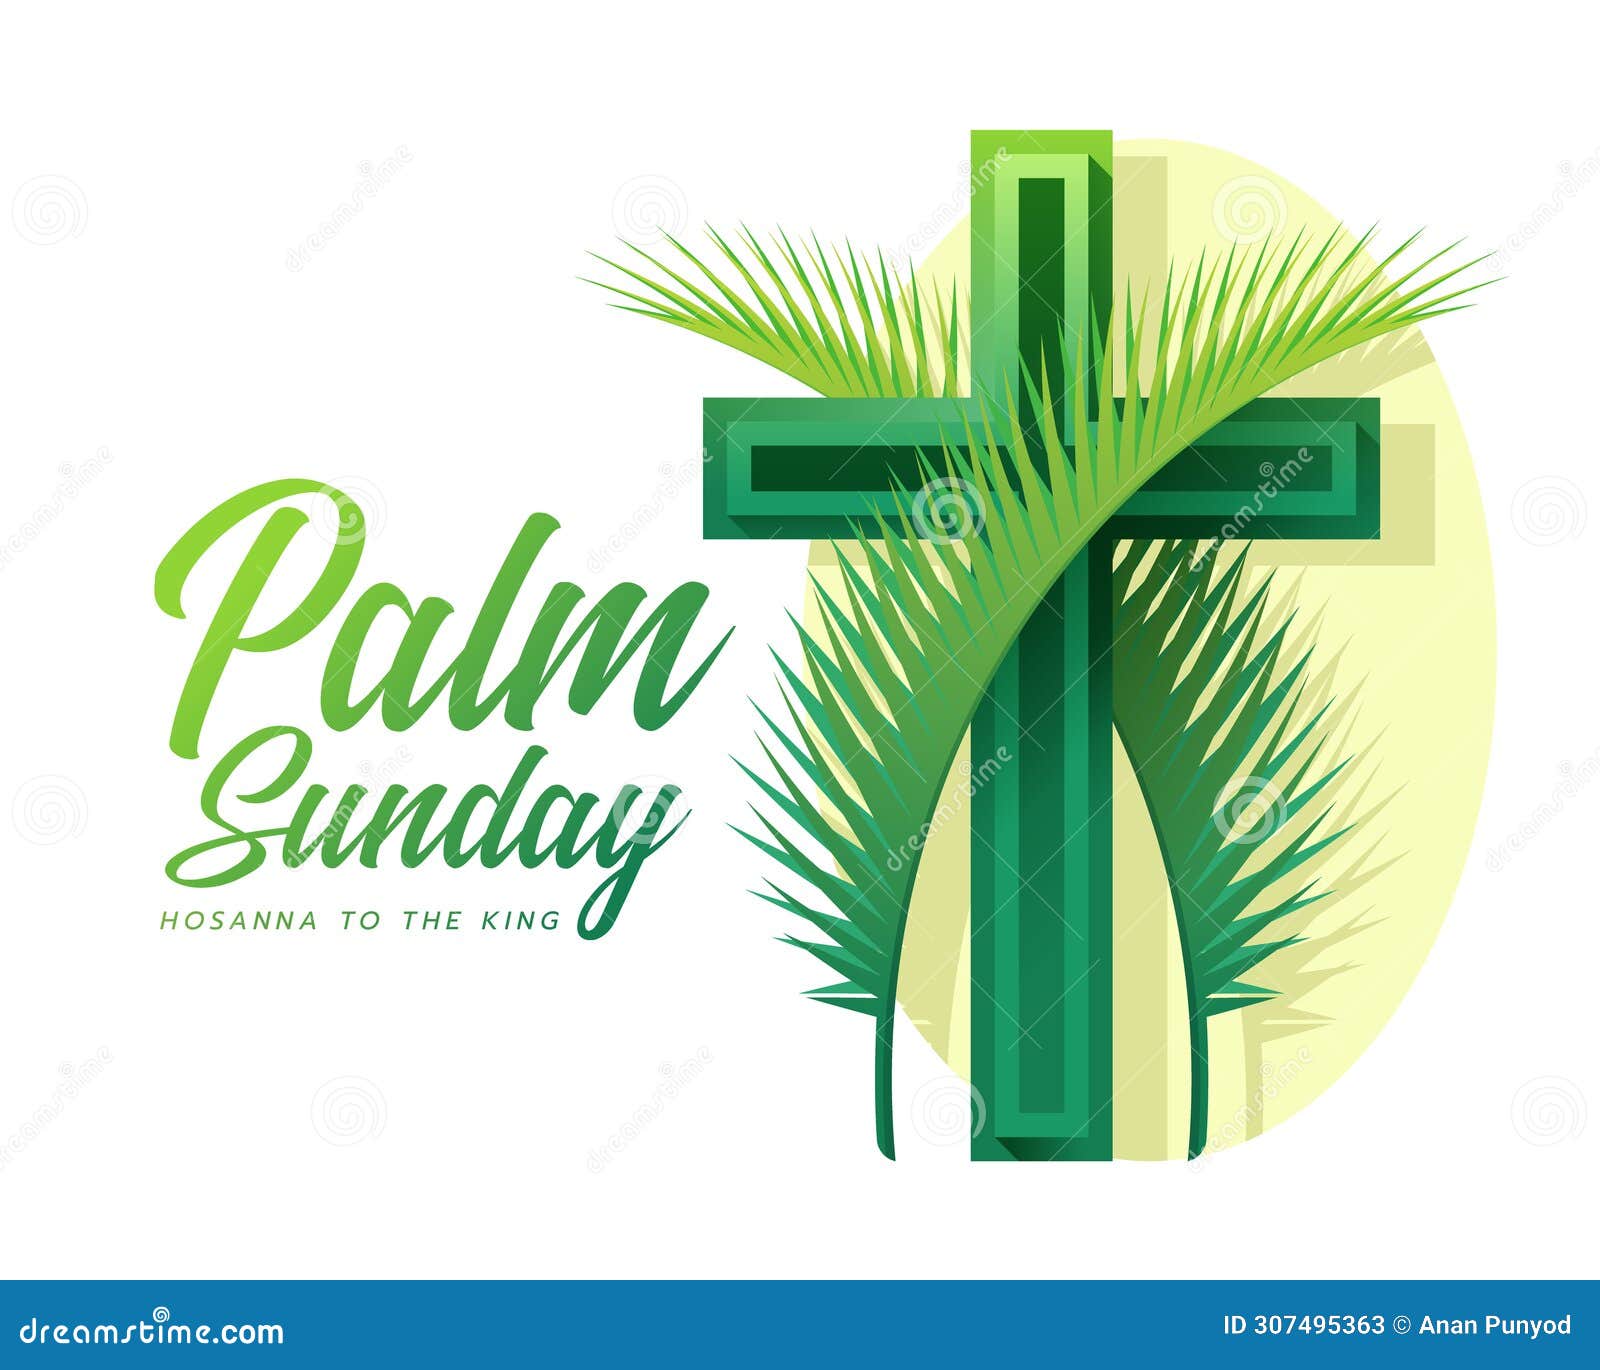 palm sunday, hosanna tothe king - two green palm leave cross green cross crucifix sign on oval background  